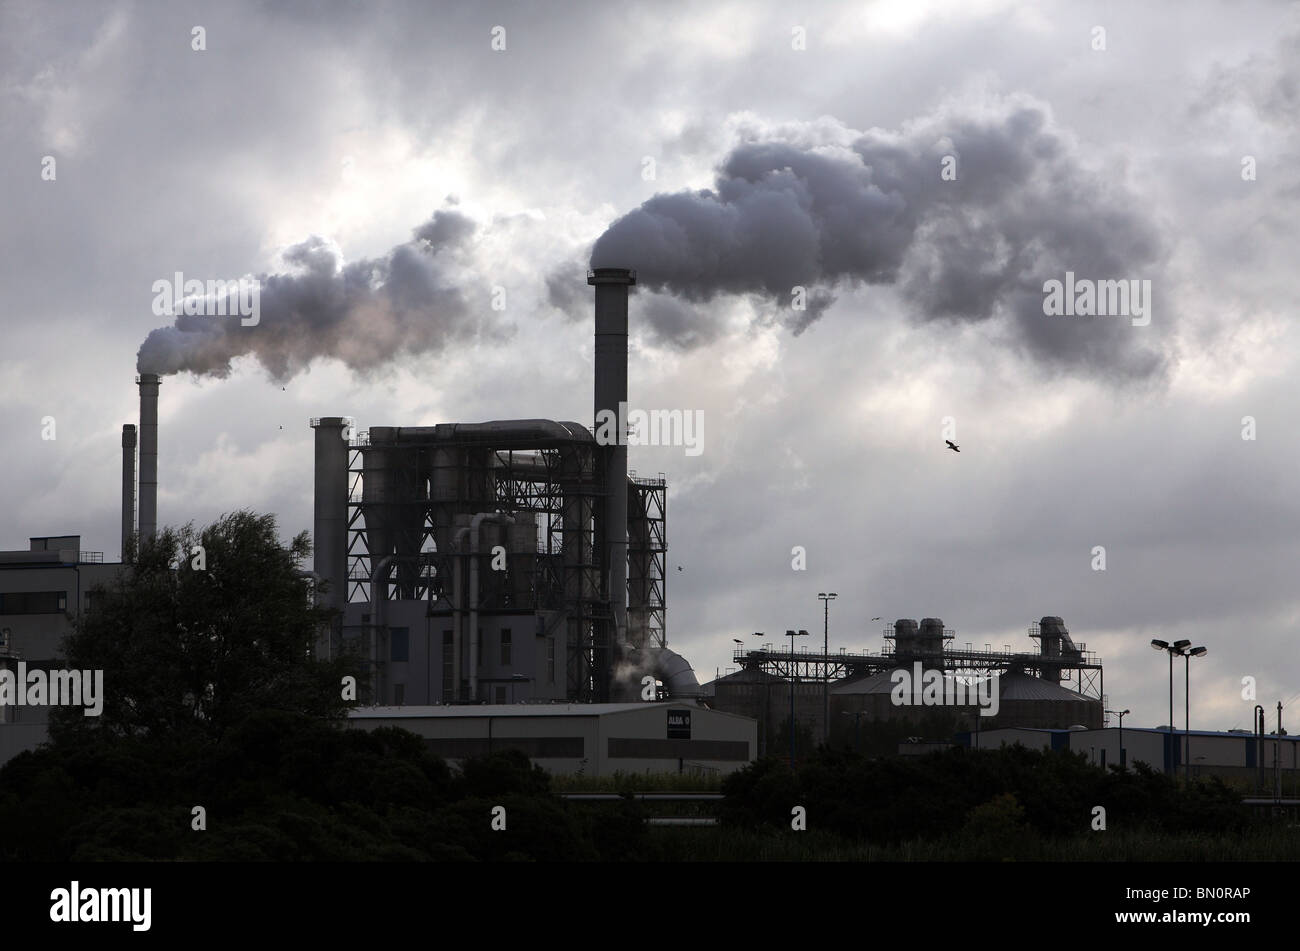 Fuming chimneys at the industrial facilities of Klausner Nordic Timber, Wismar, Germany Stock Photo